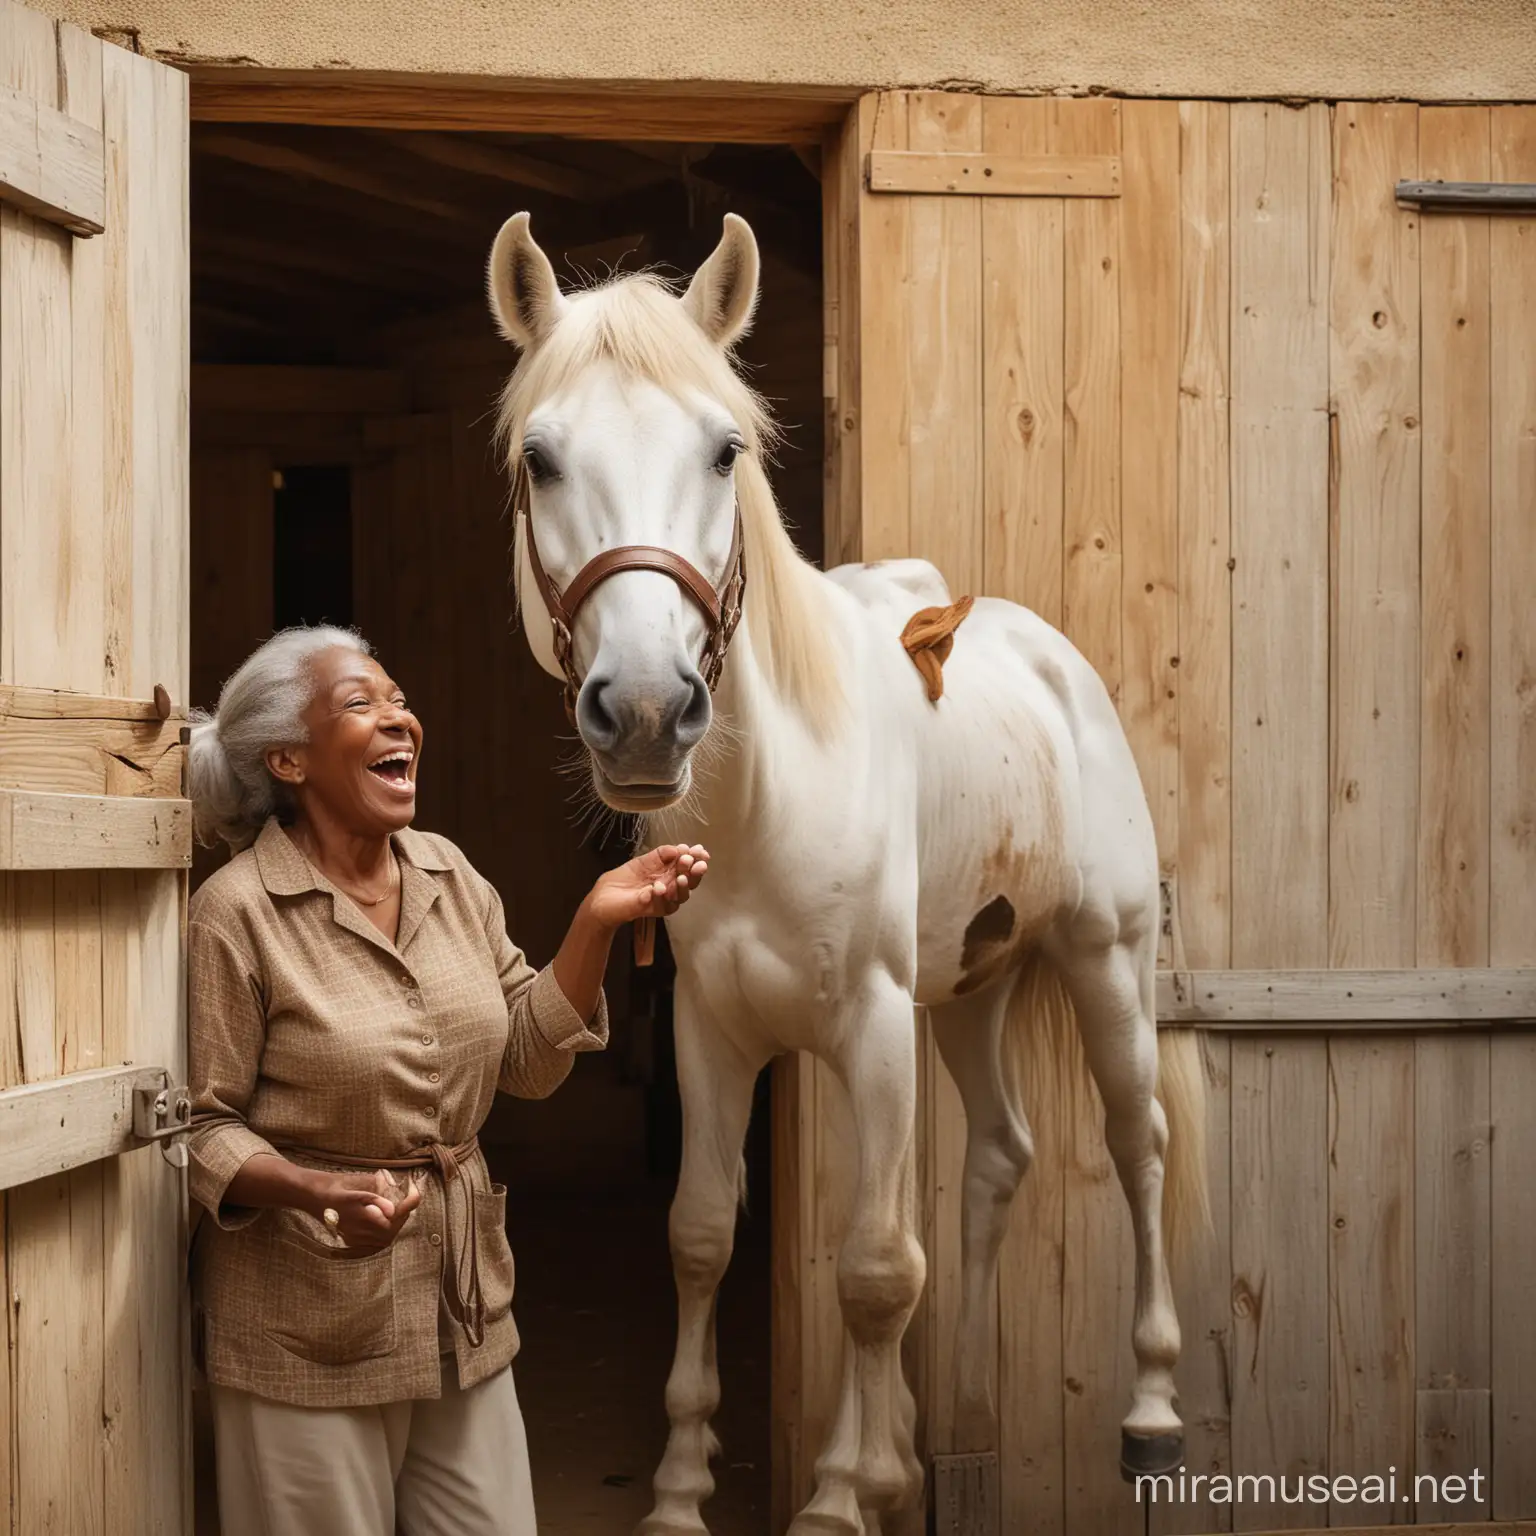 Excited African American Elderly Couple with White Horse in Illuminated Stable